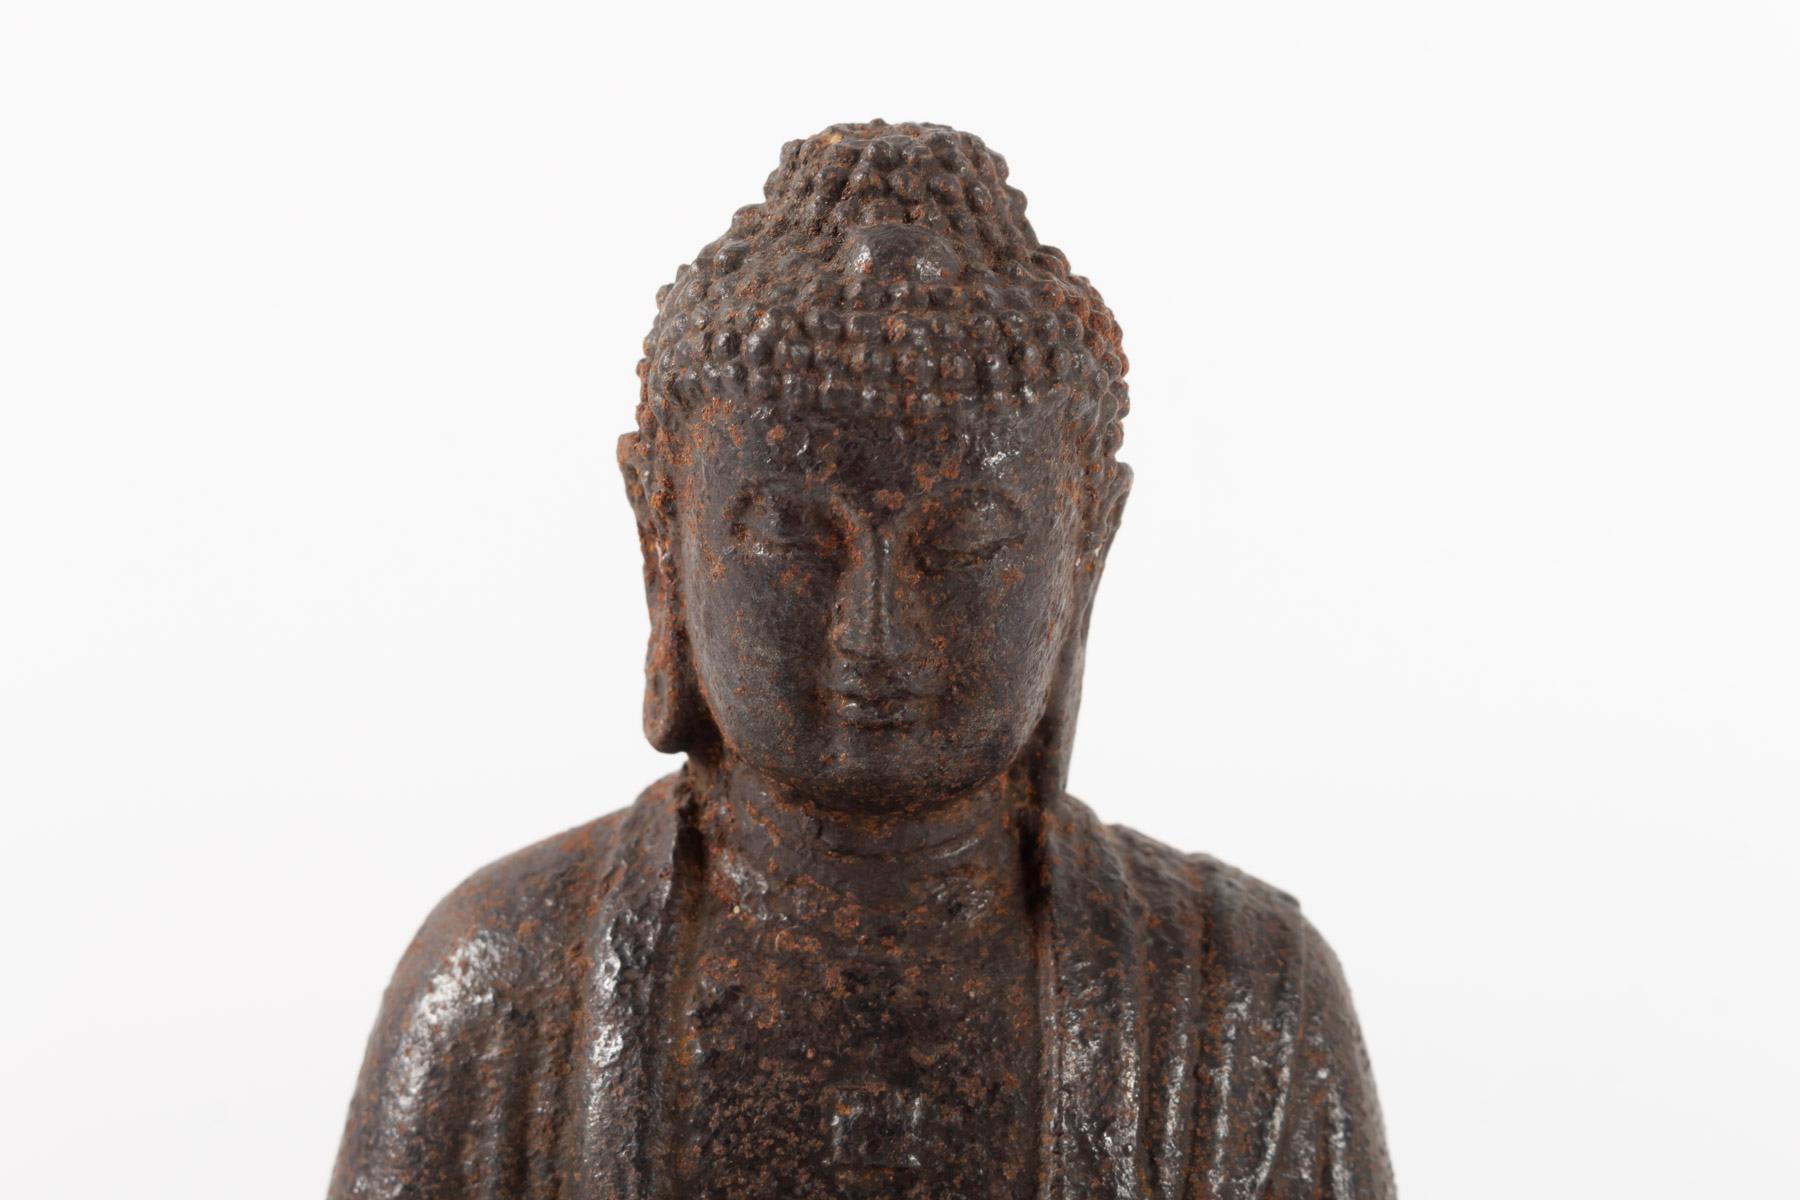 Buddha in meditation on a lotus-shaped bass, China, 19th century, finely chiseled cast iron.
Measures: H 16.5cm, W 8cm, D 10cm.